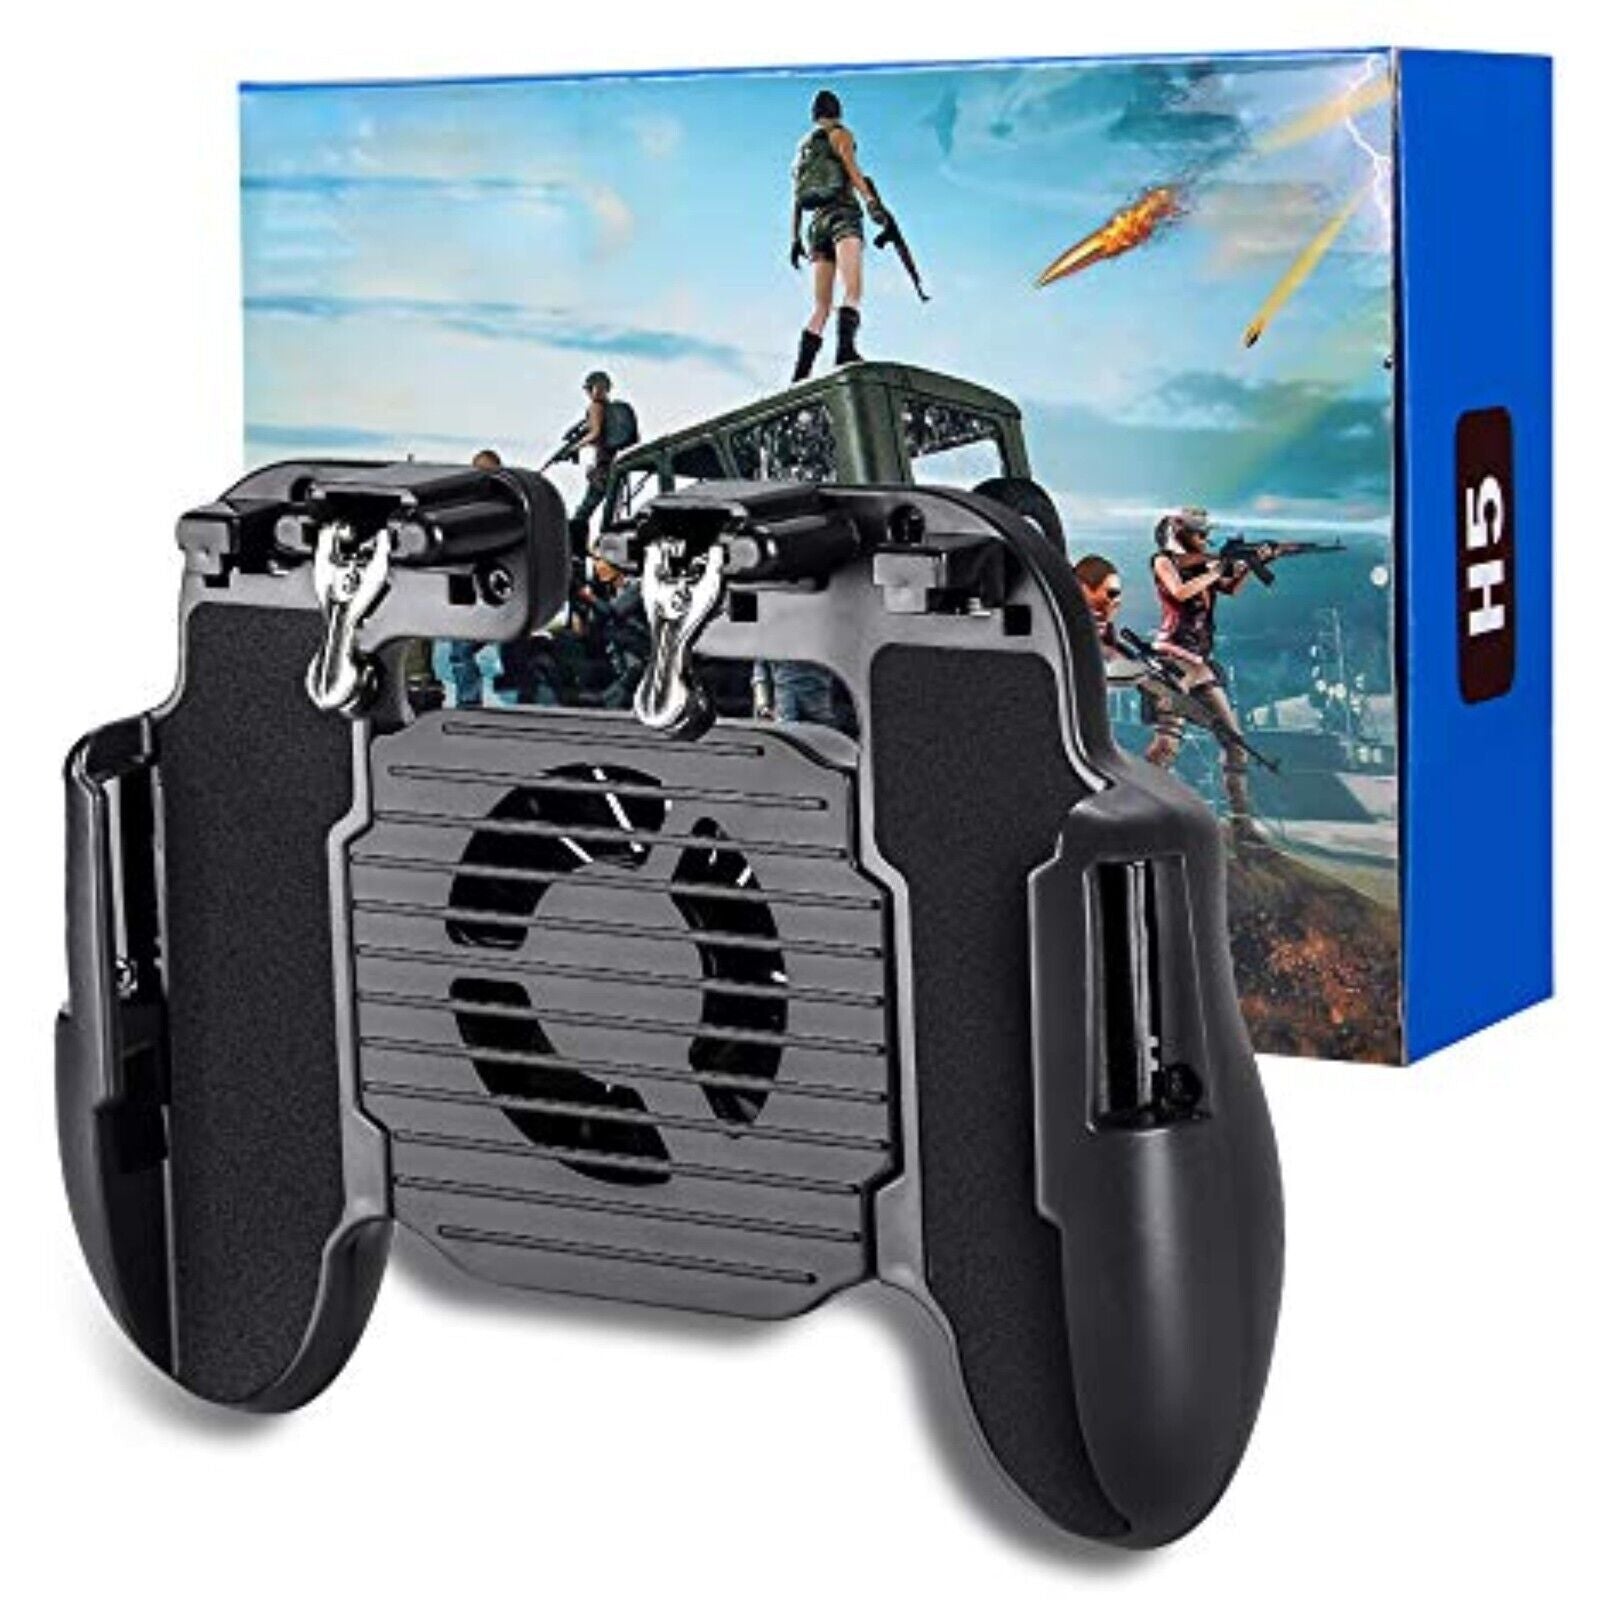 Qoosea Mobile Game Controller Gamepad Joystick mit Lüfter Cooling Fan for PUBG